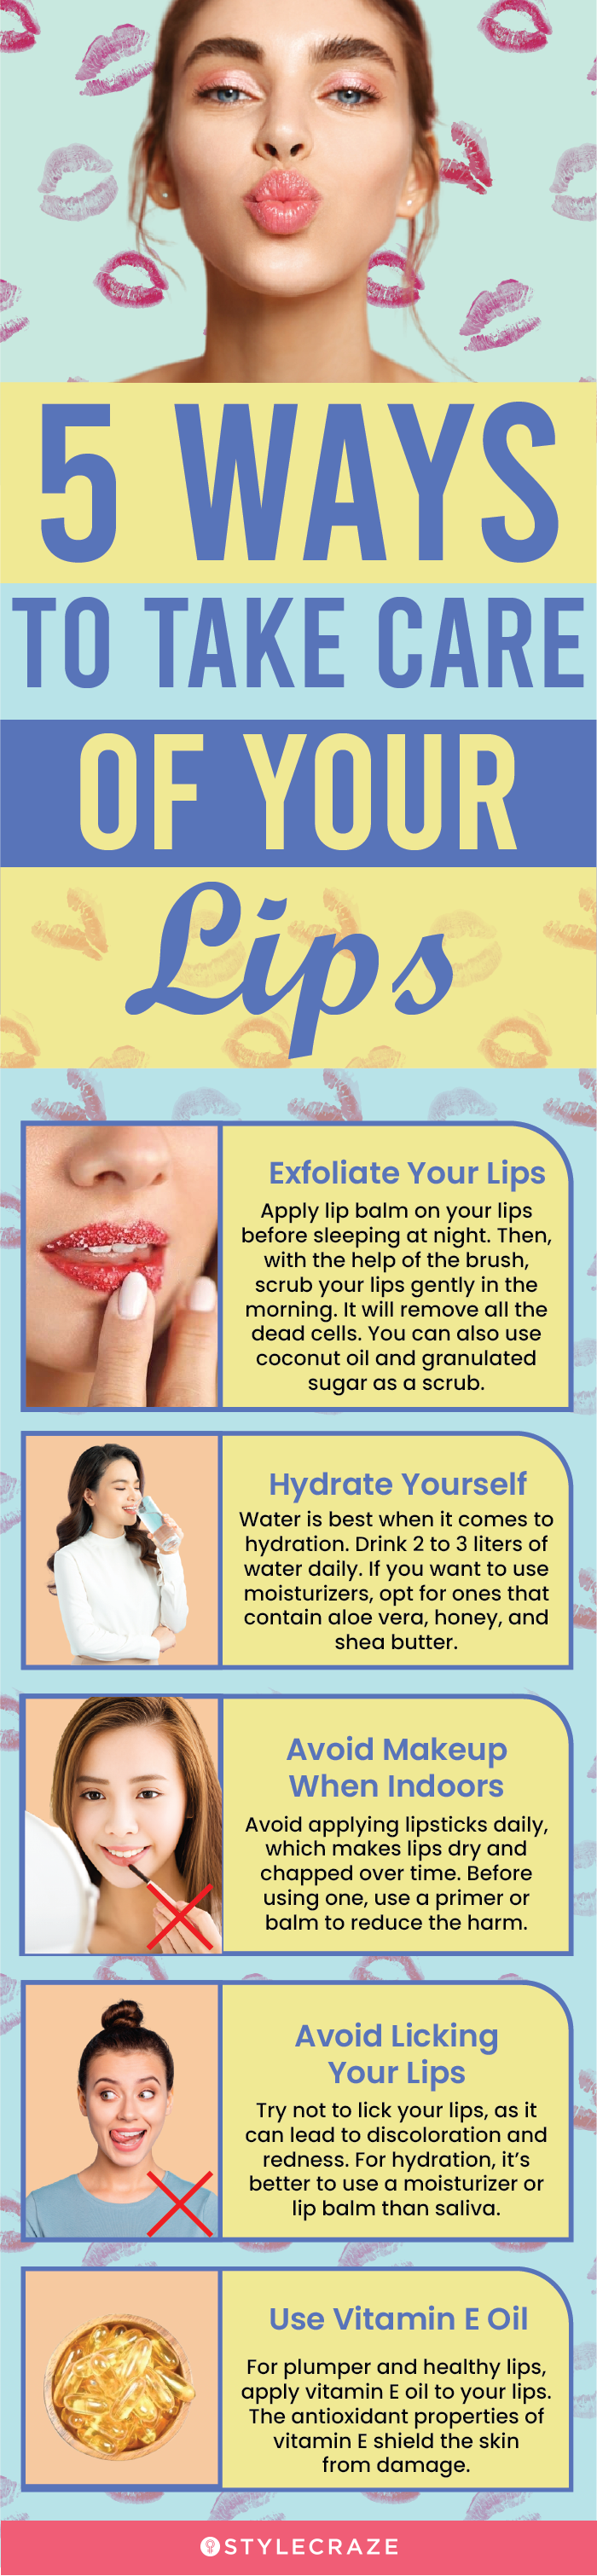 5 ways to take care of your lips (infographic)